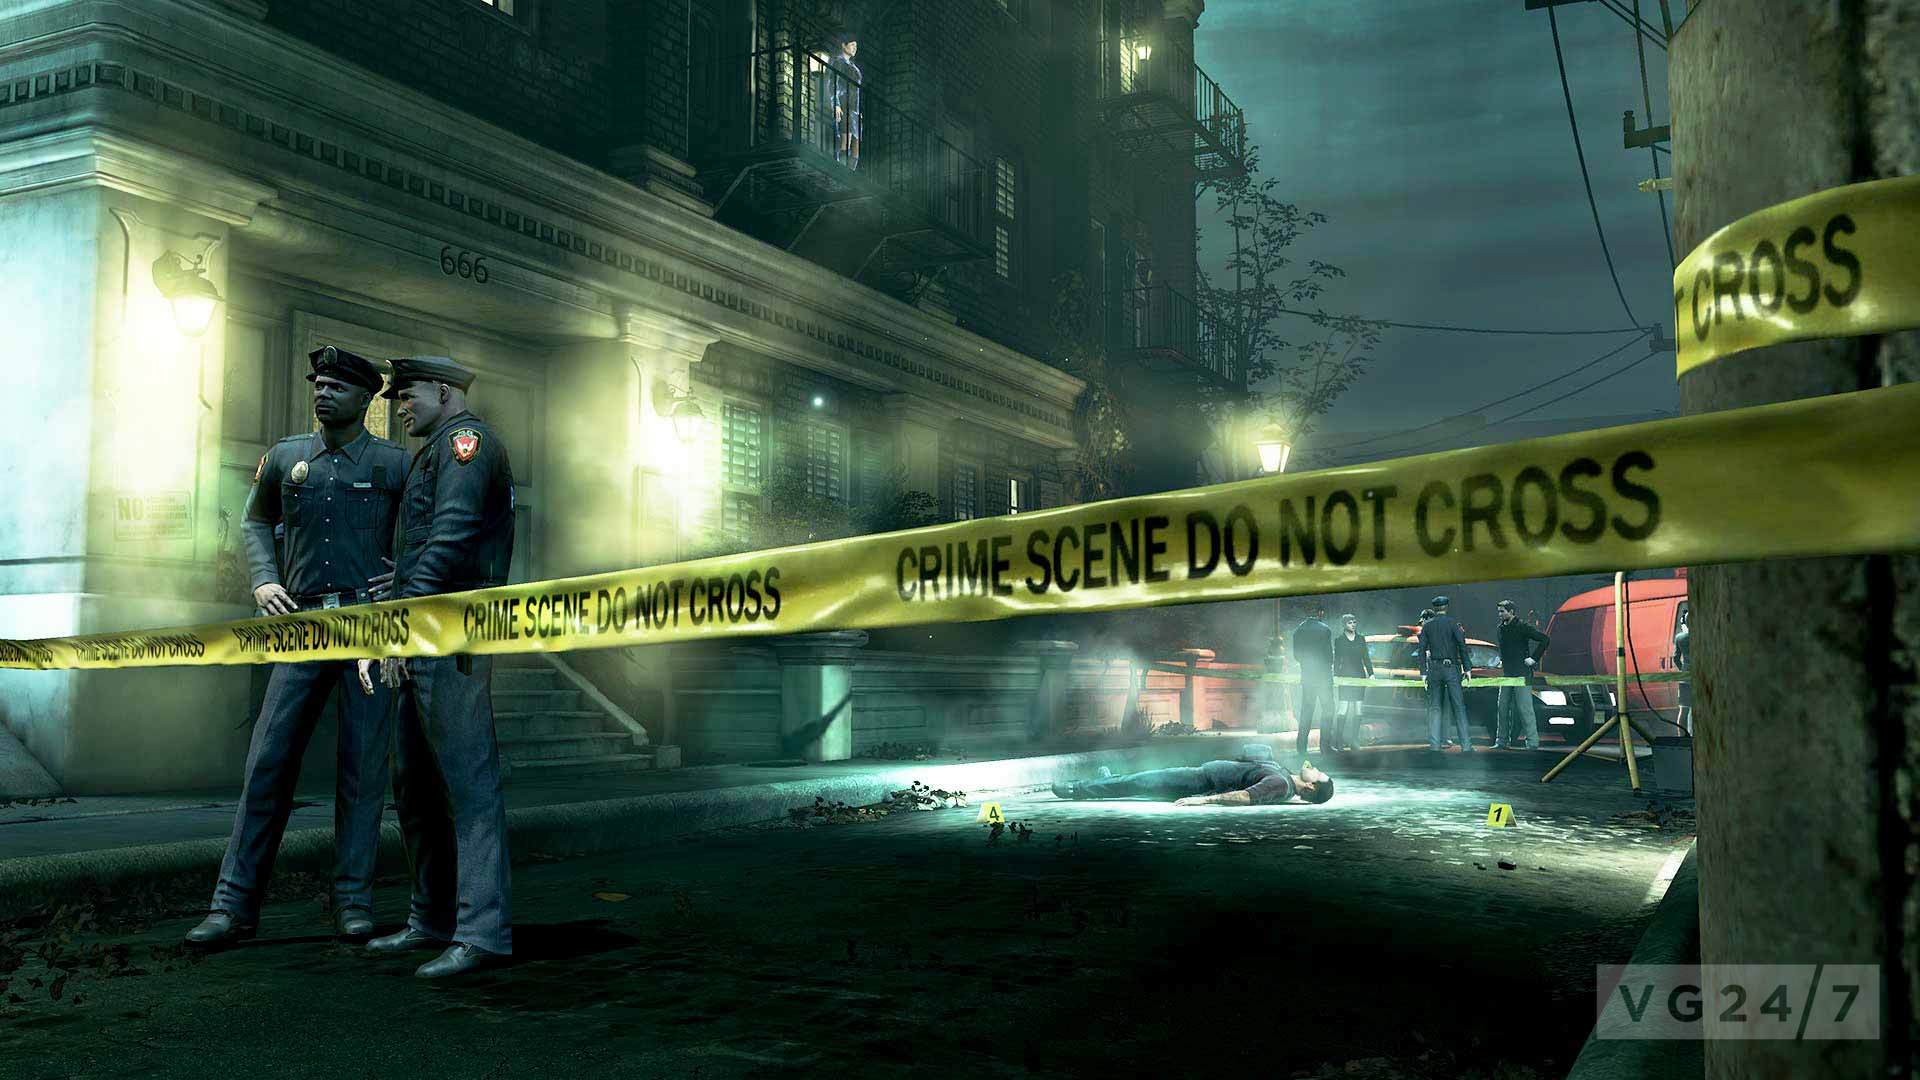 Crime Scene Background Images HD Pictures and Wallpaper For Free Download   Pngtree